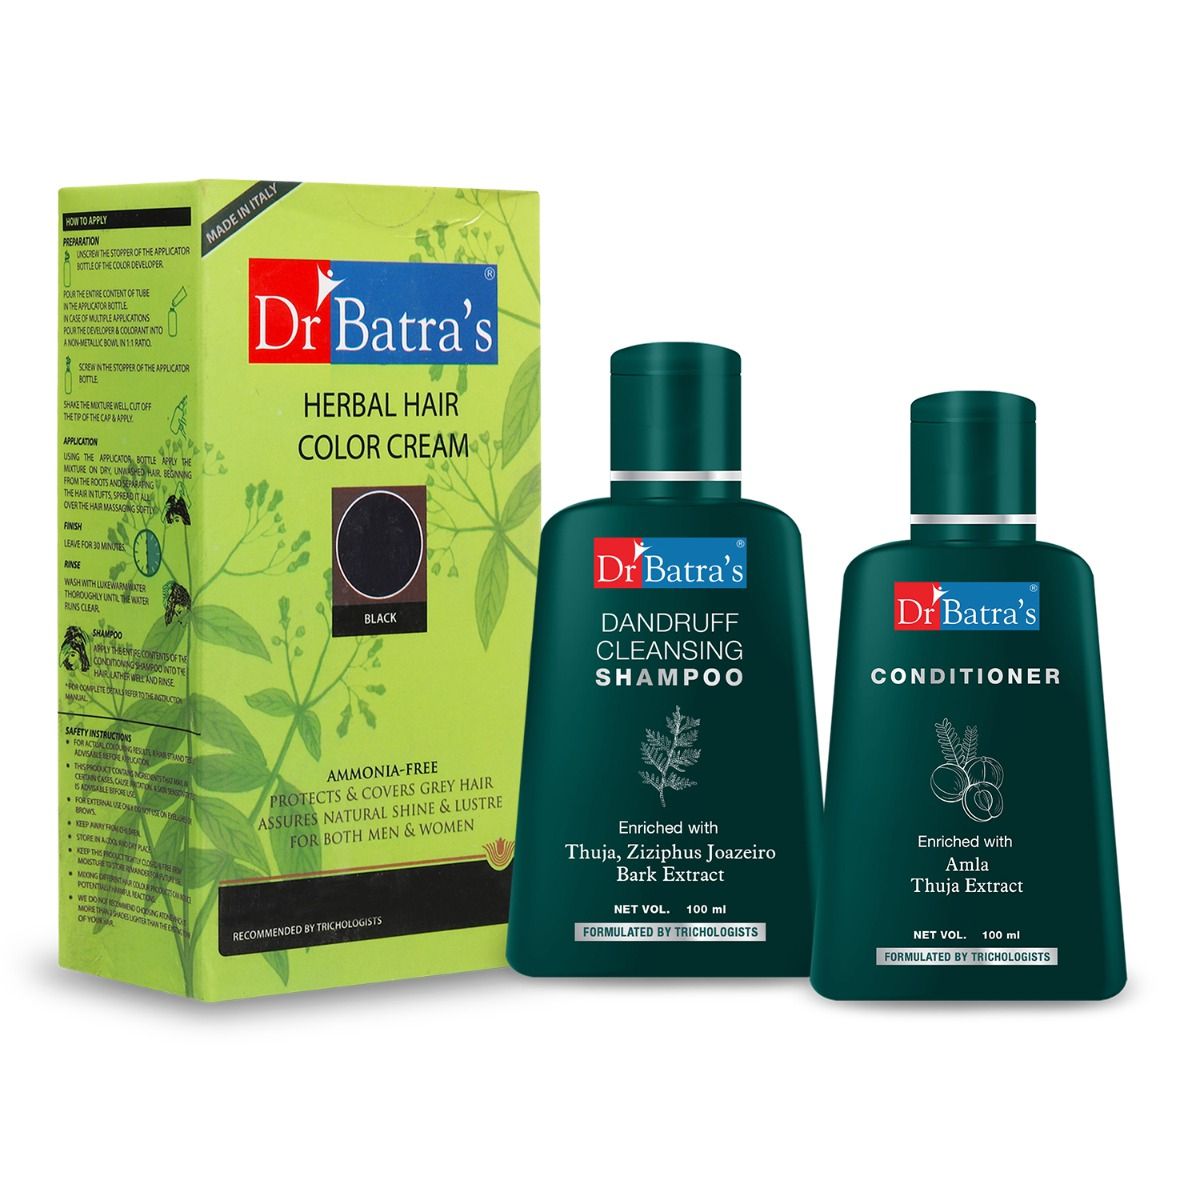     			Dr Batra's Herbal Hair Color Creamblack, Dandruff Cleansing Shampoo And Conditioner (Pack Of 3)